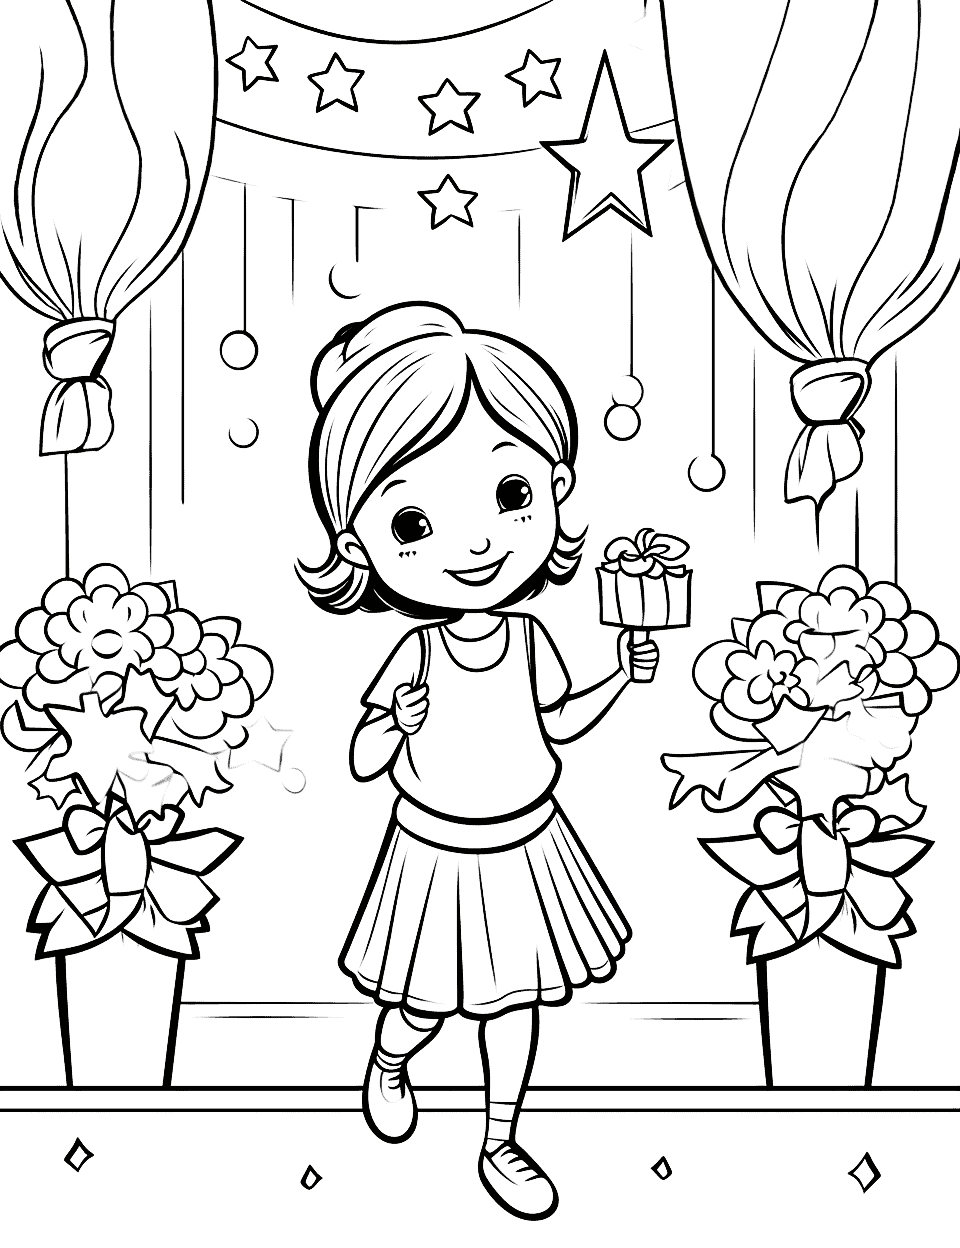 Ballerina's Stage Birthday Happy Coloring Page - A ballerina receiving flowers and birthday gifts on stage.